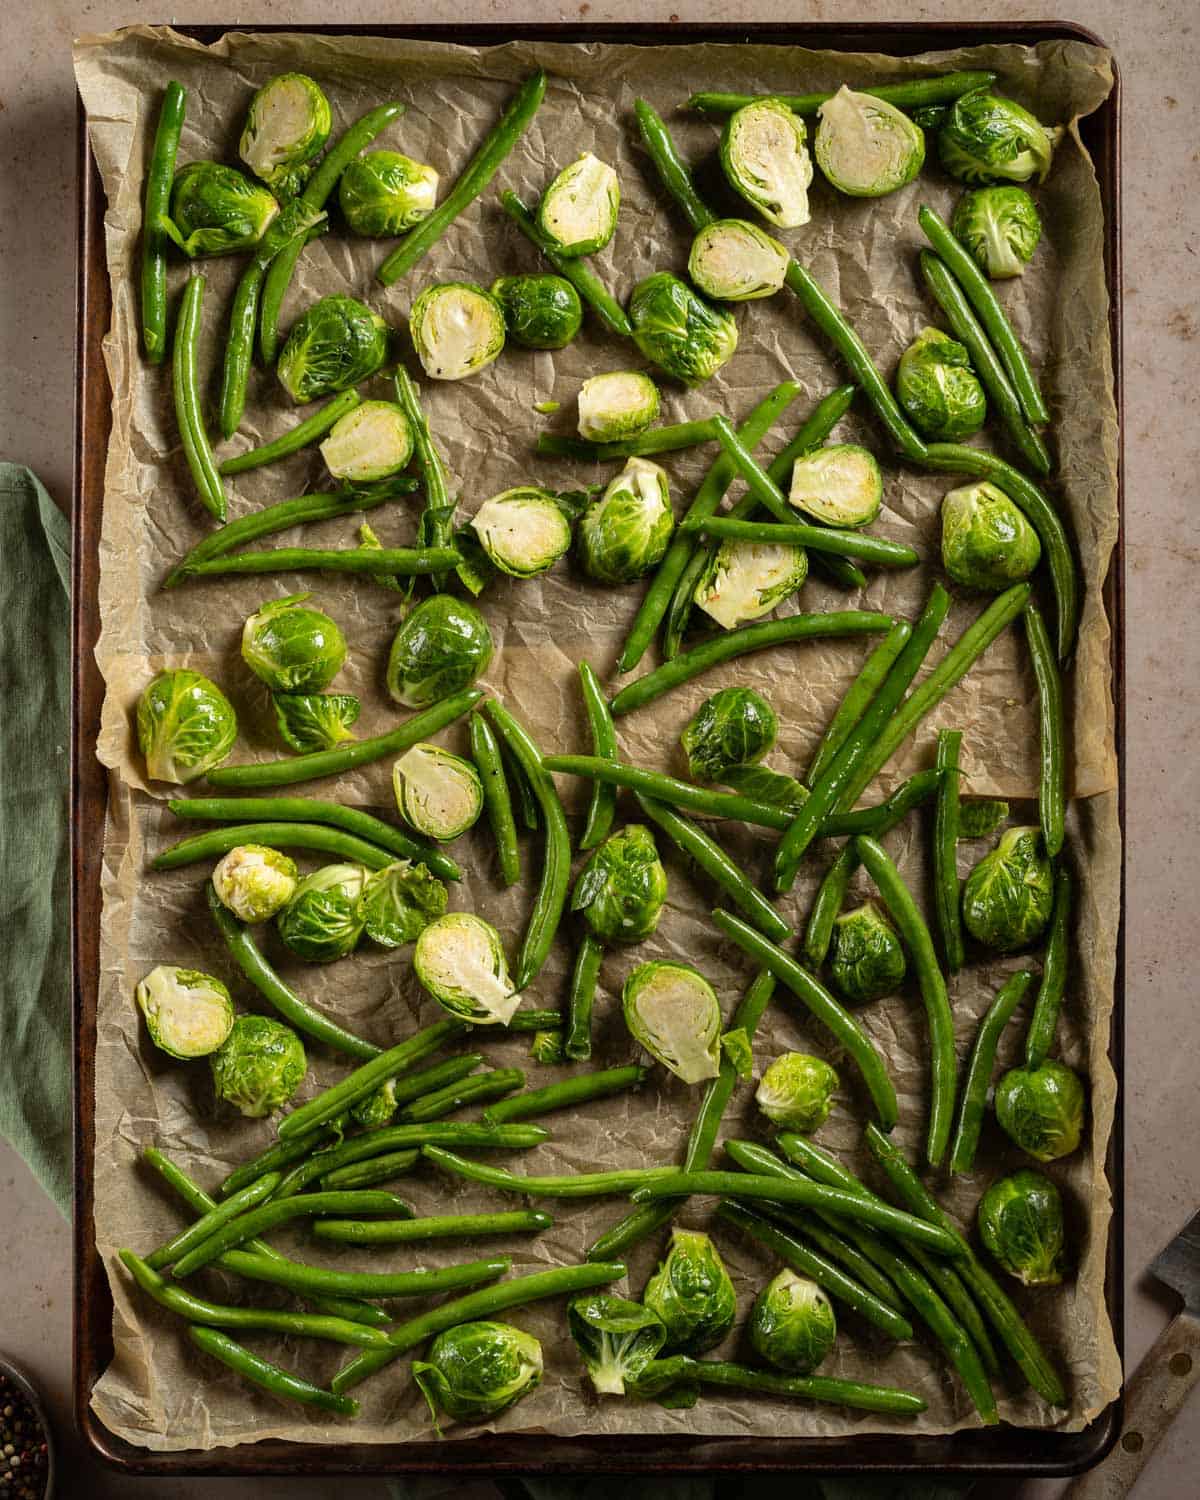 Green Beans and Brussel Sprouts on a baking sheet.